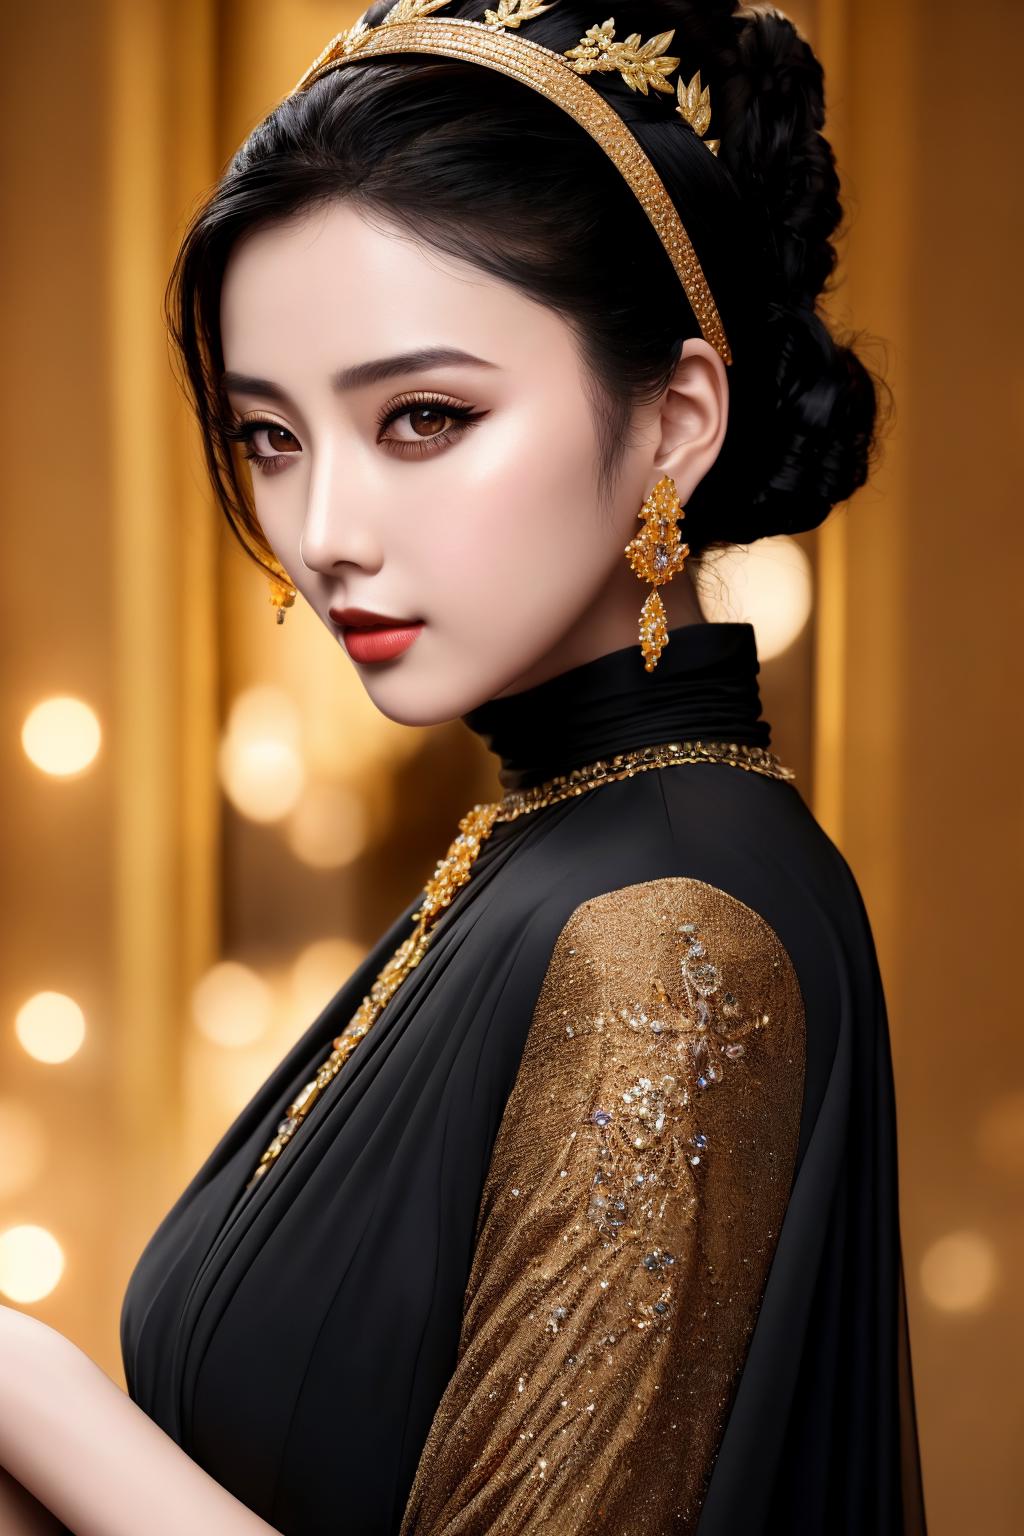 Haute Couture | Fan Bingbing 范冰冰 style fashion image by EDG